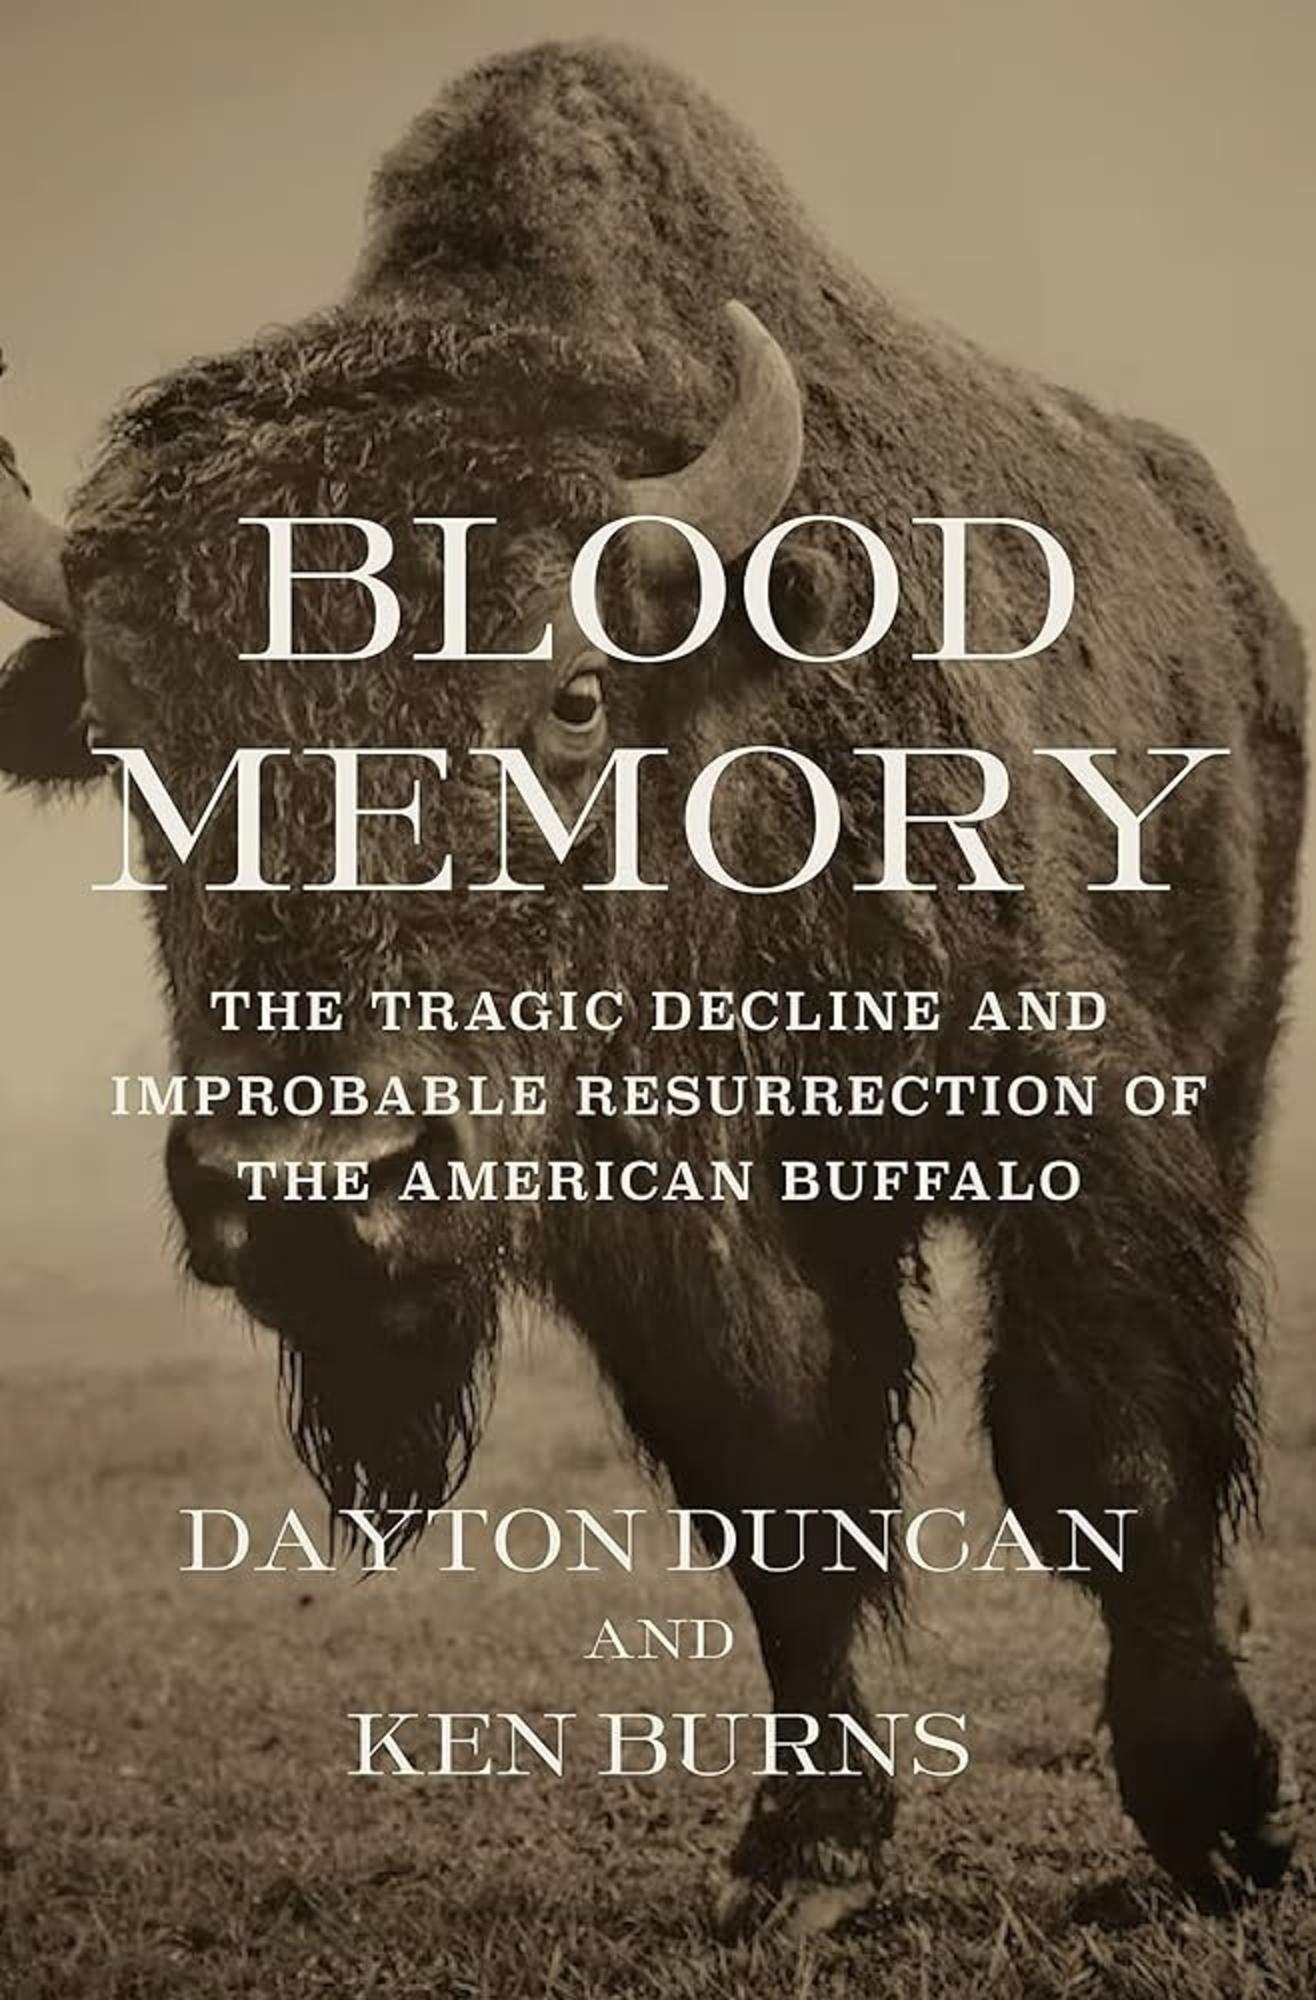 Duncan's is companion book, "Blood Memory," was published Oct. 10, 2023.